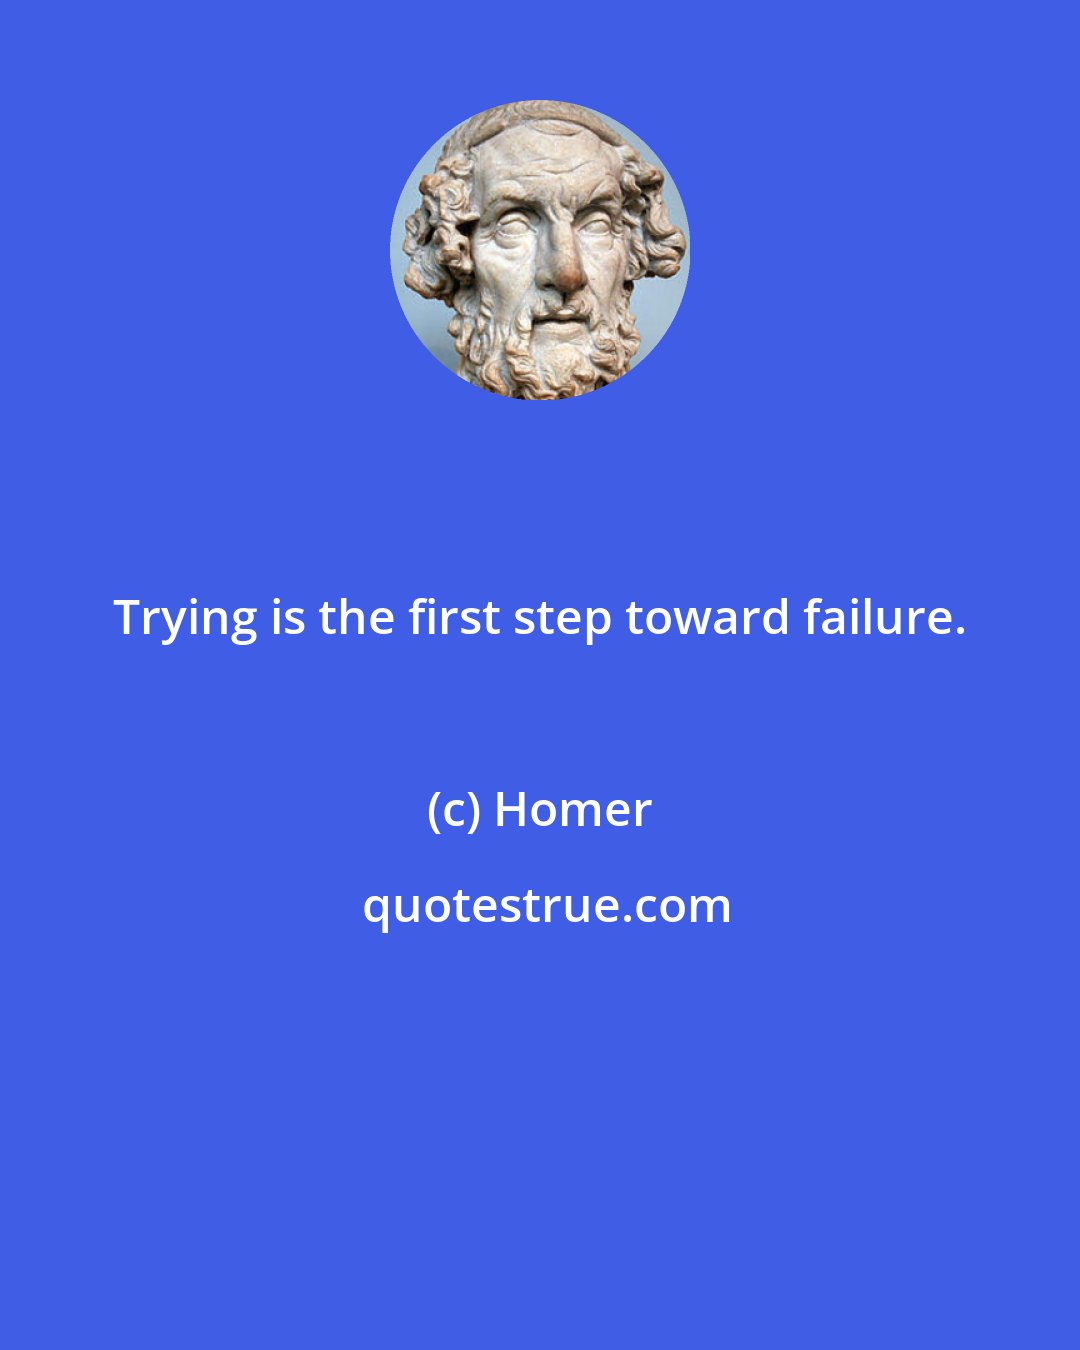 Homer: Trying is the first step toward failure.